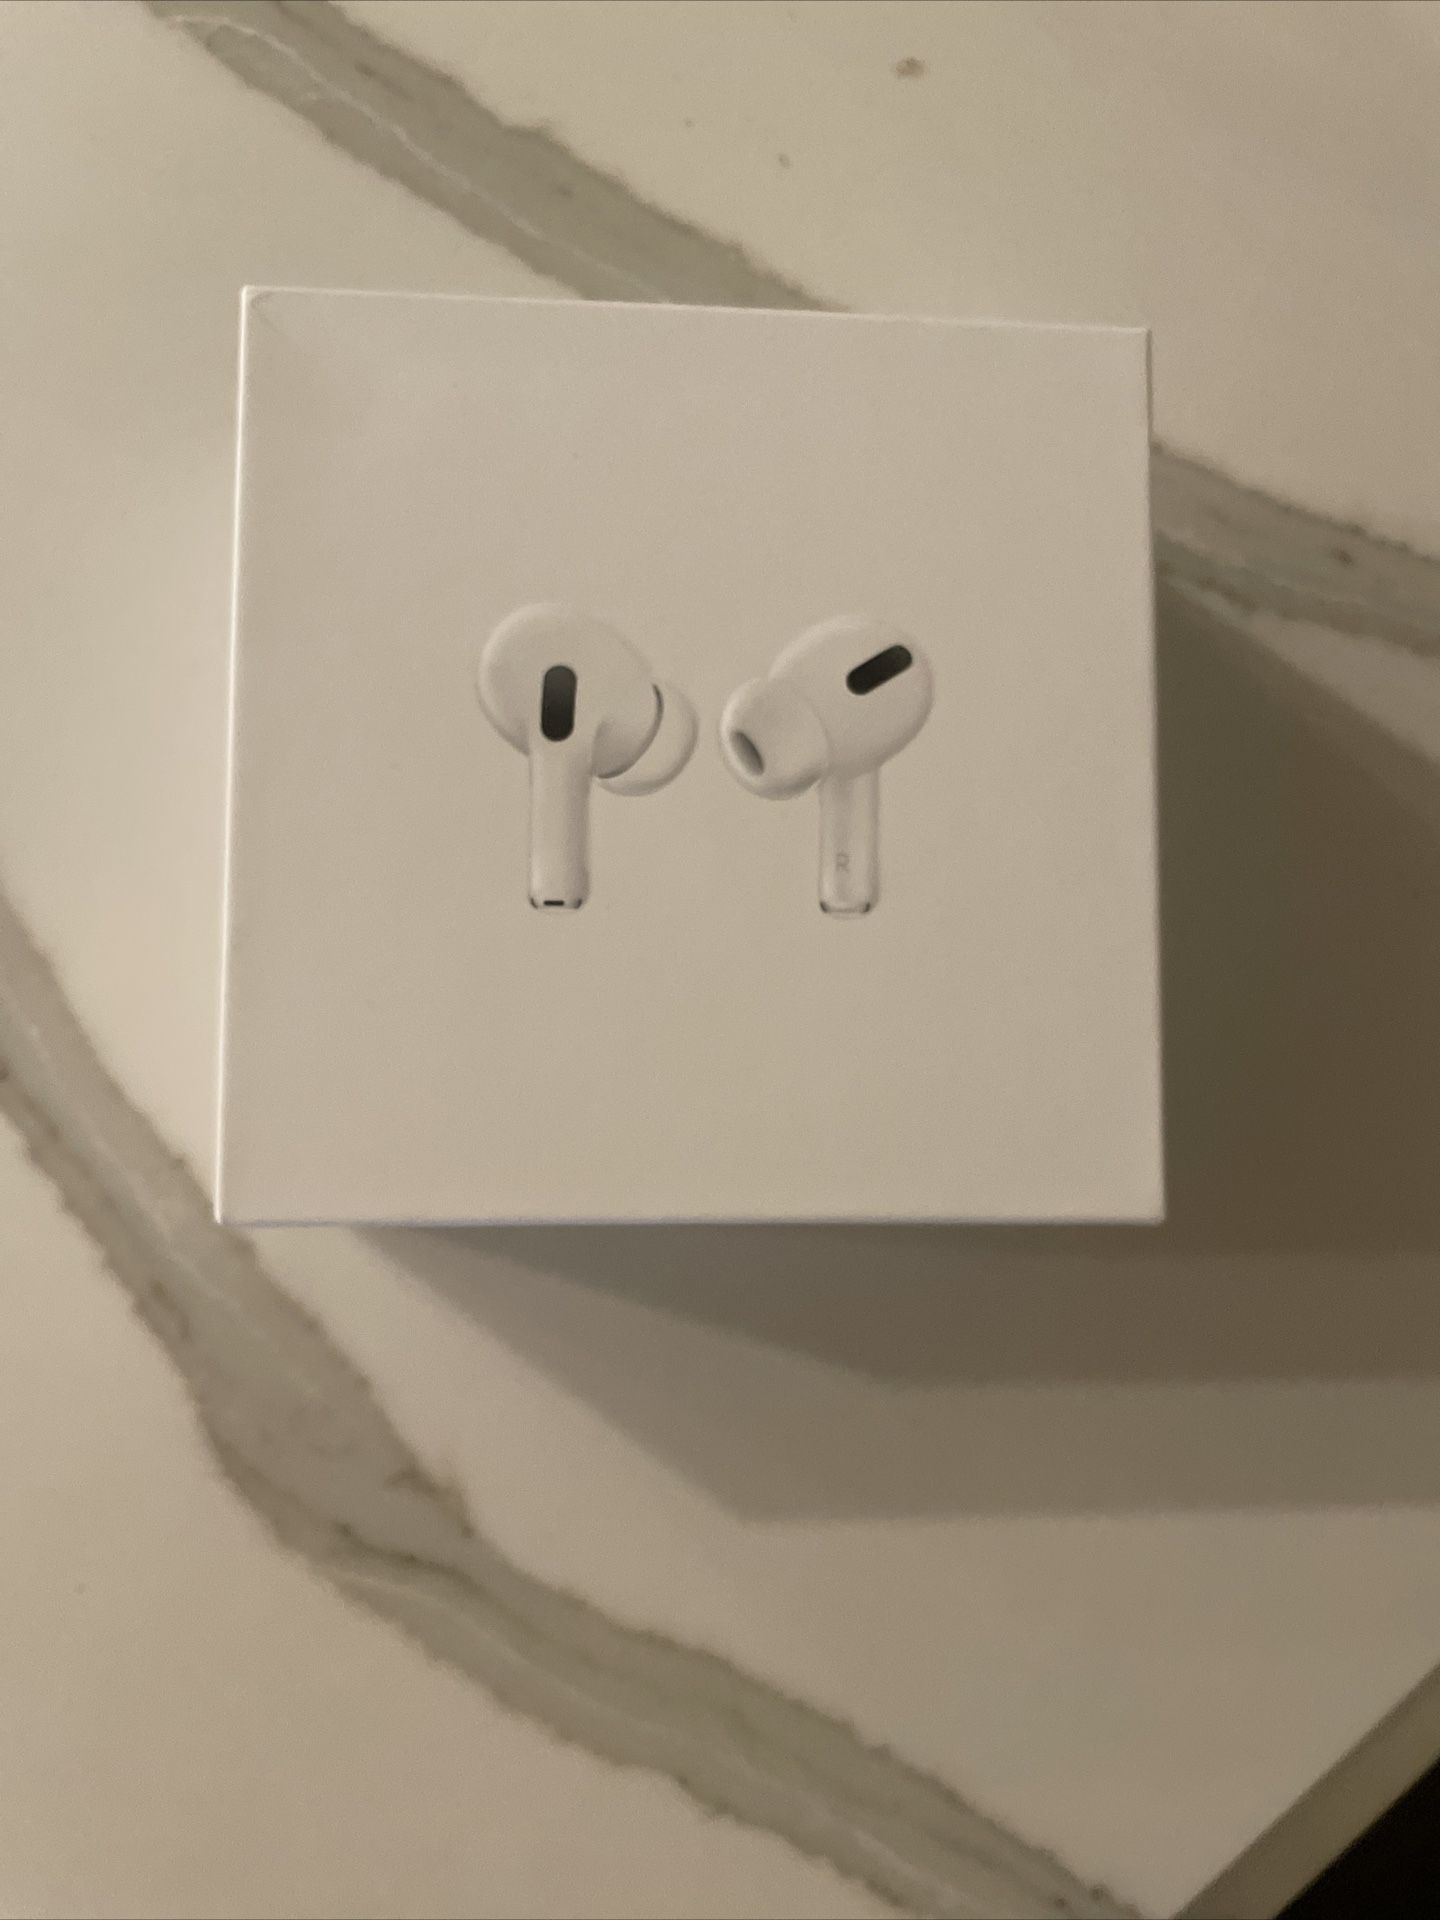 airpod pros 2nd generation need gone asap (SEND BEST OFFER)